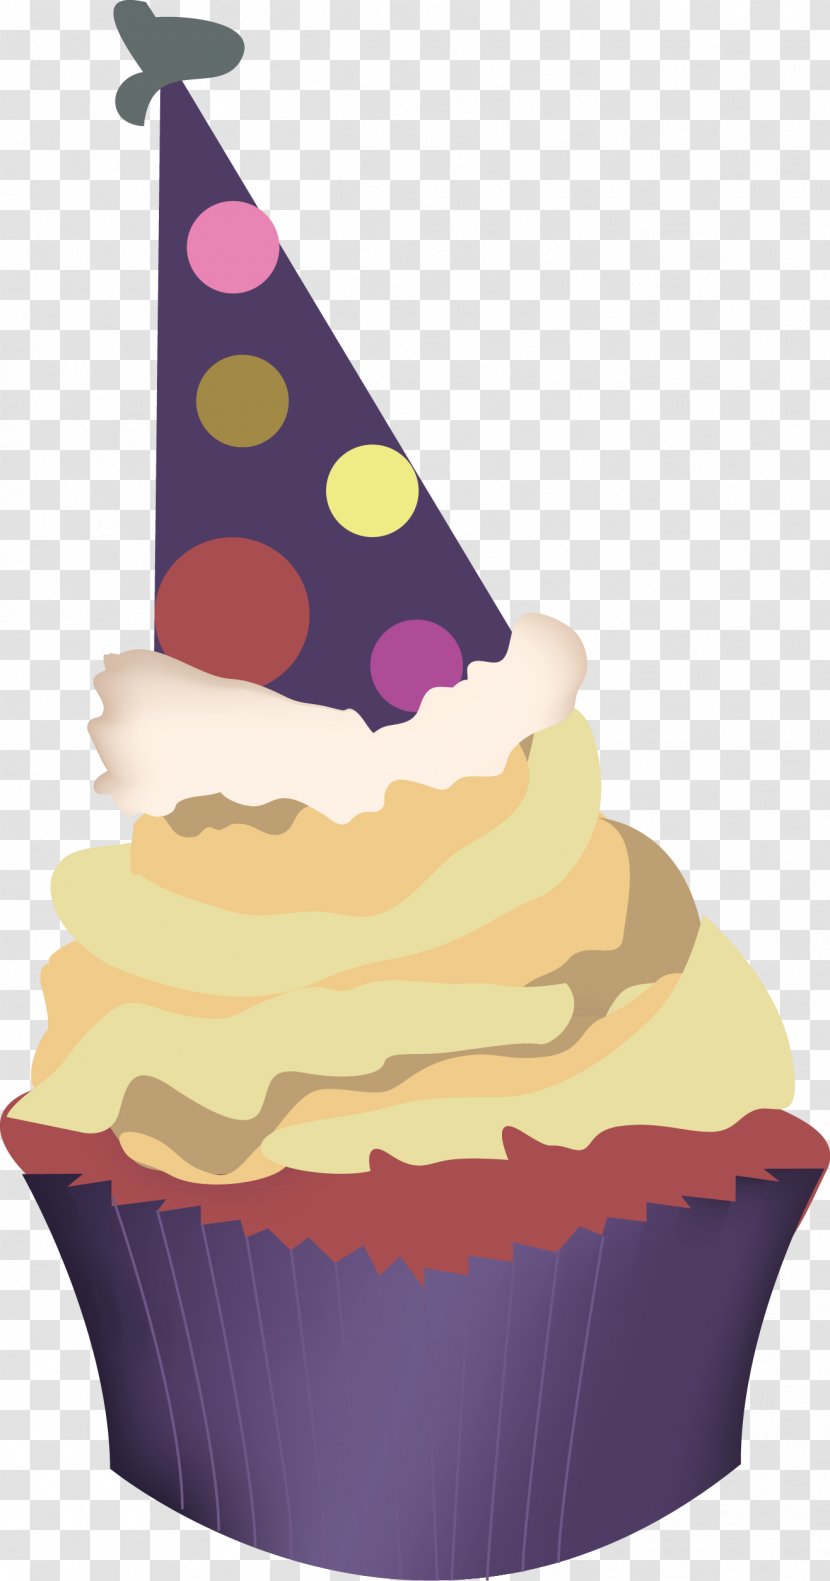 Cupcake Birthday Cake Bakery Muffin Chocolate - Layer - Vector Transparent PNG